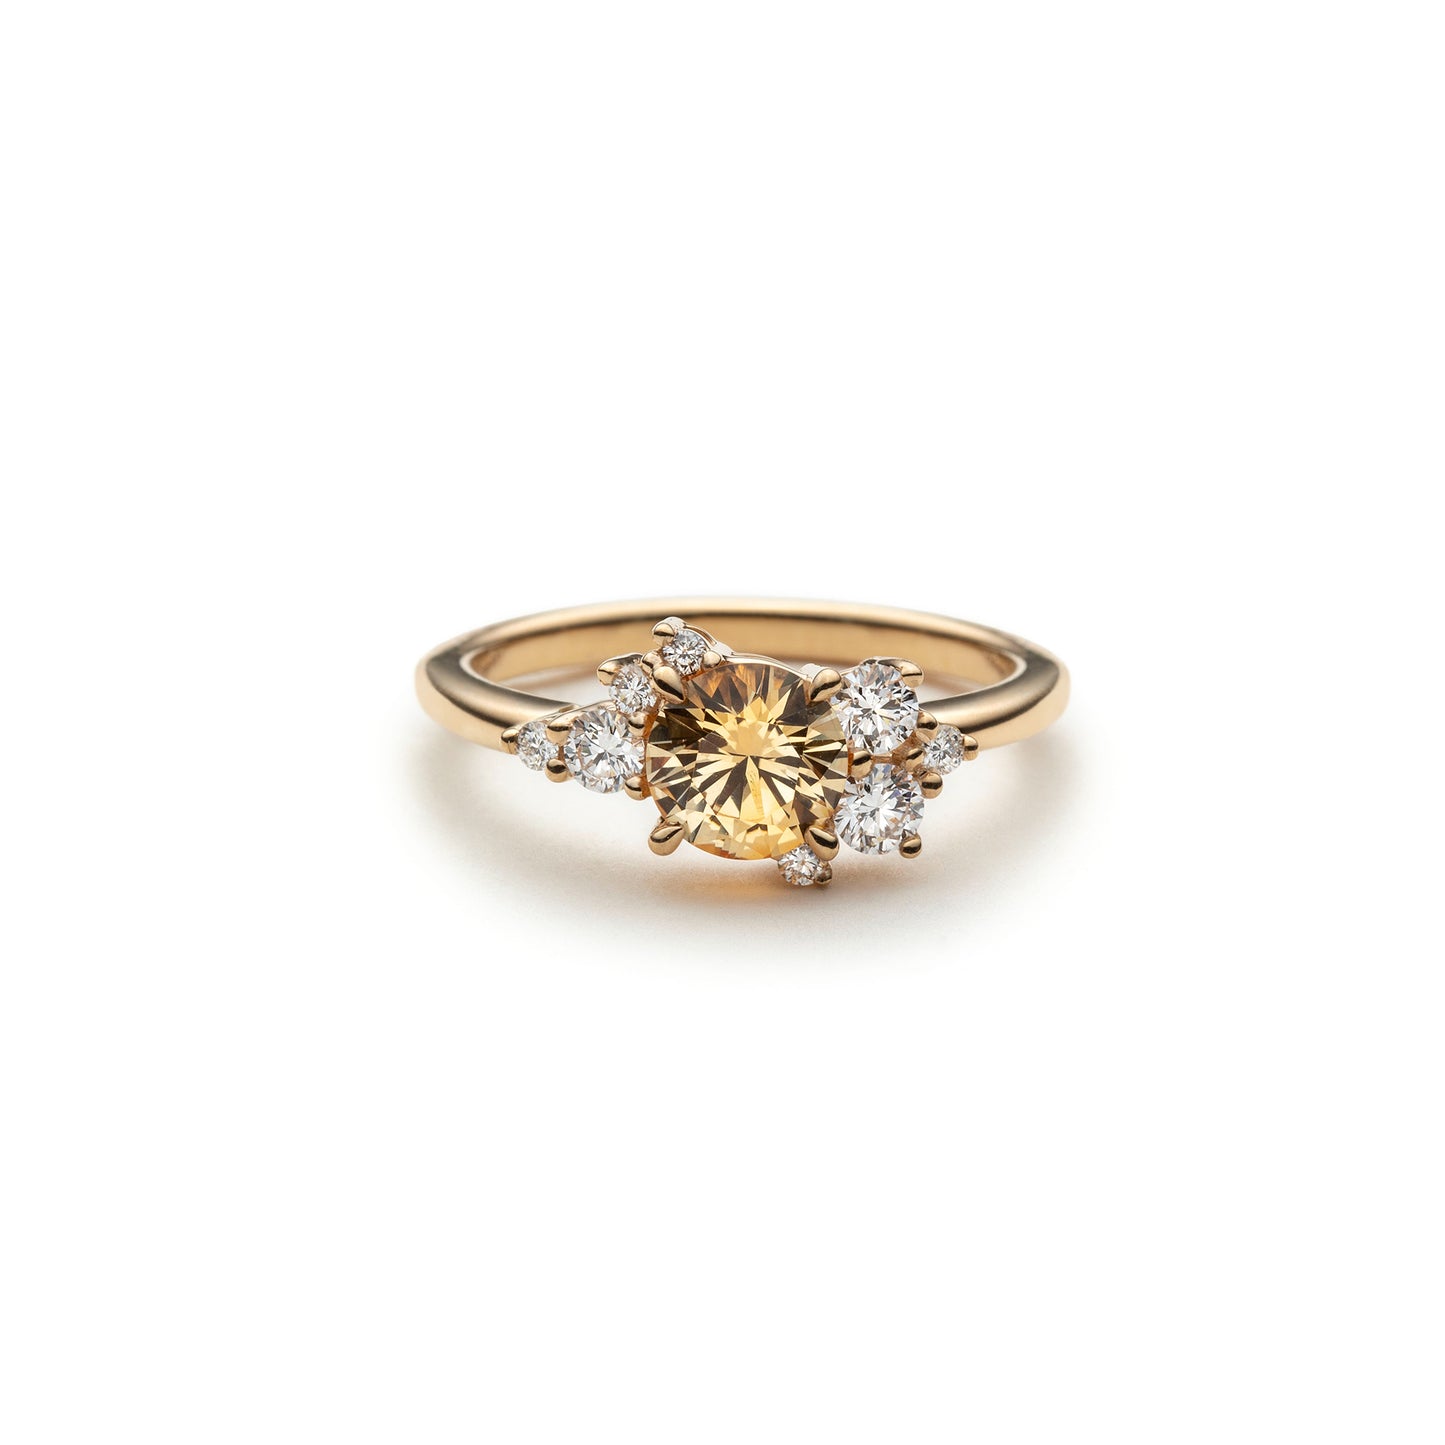 One of a Kind Light Yellow Sapphire and Diamond Asymmetric Ring